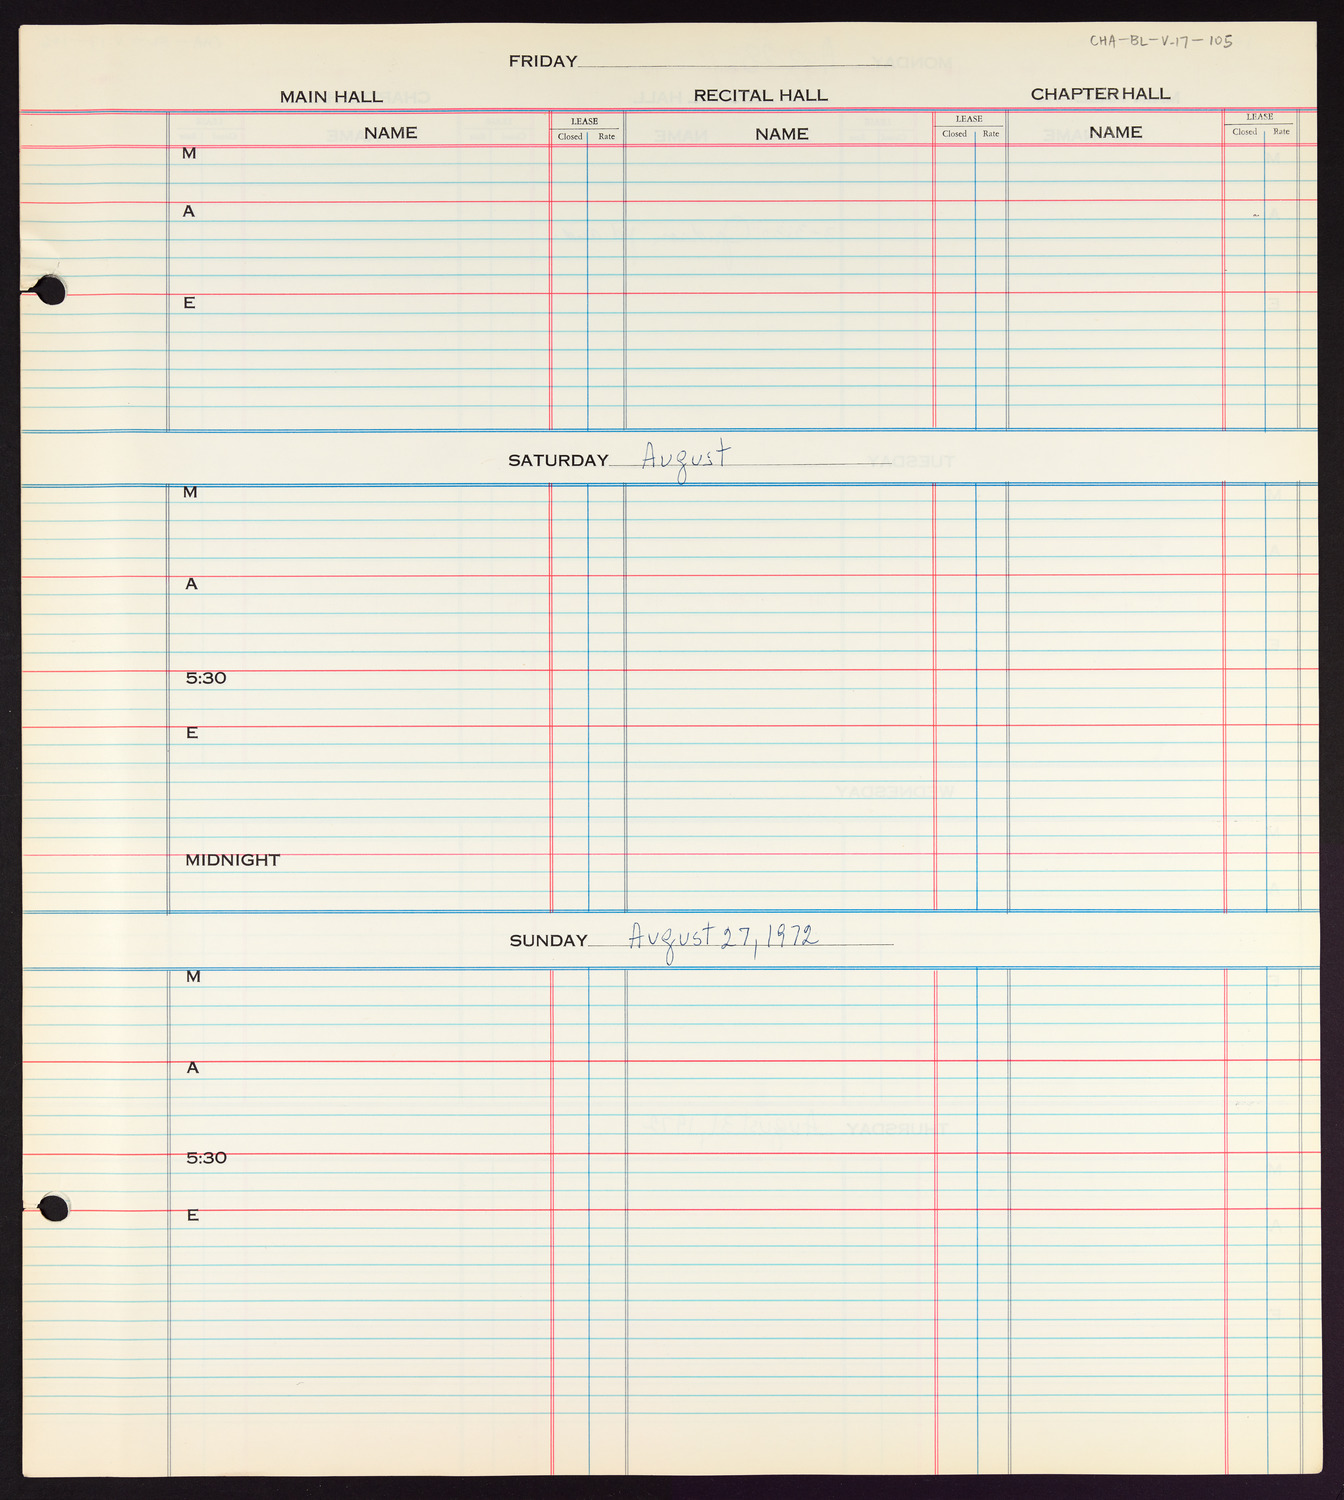 Carnegie Hall Booking Ledger, volume 17, page 105